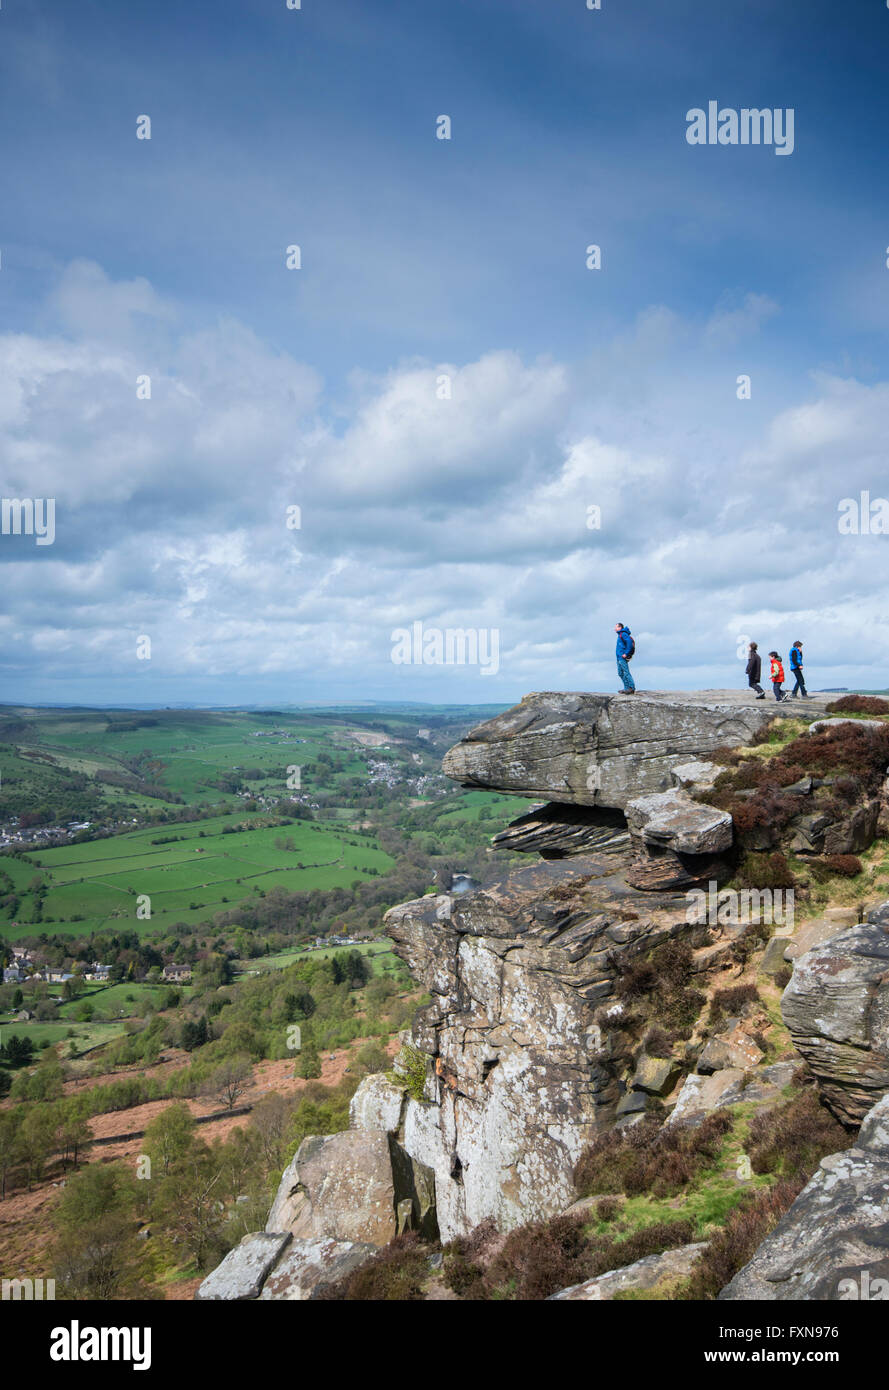 Hikers on Curbar Edge in the Peak District National Park in Derbyshire, England, UK Stock Photo